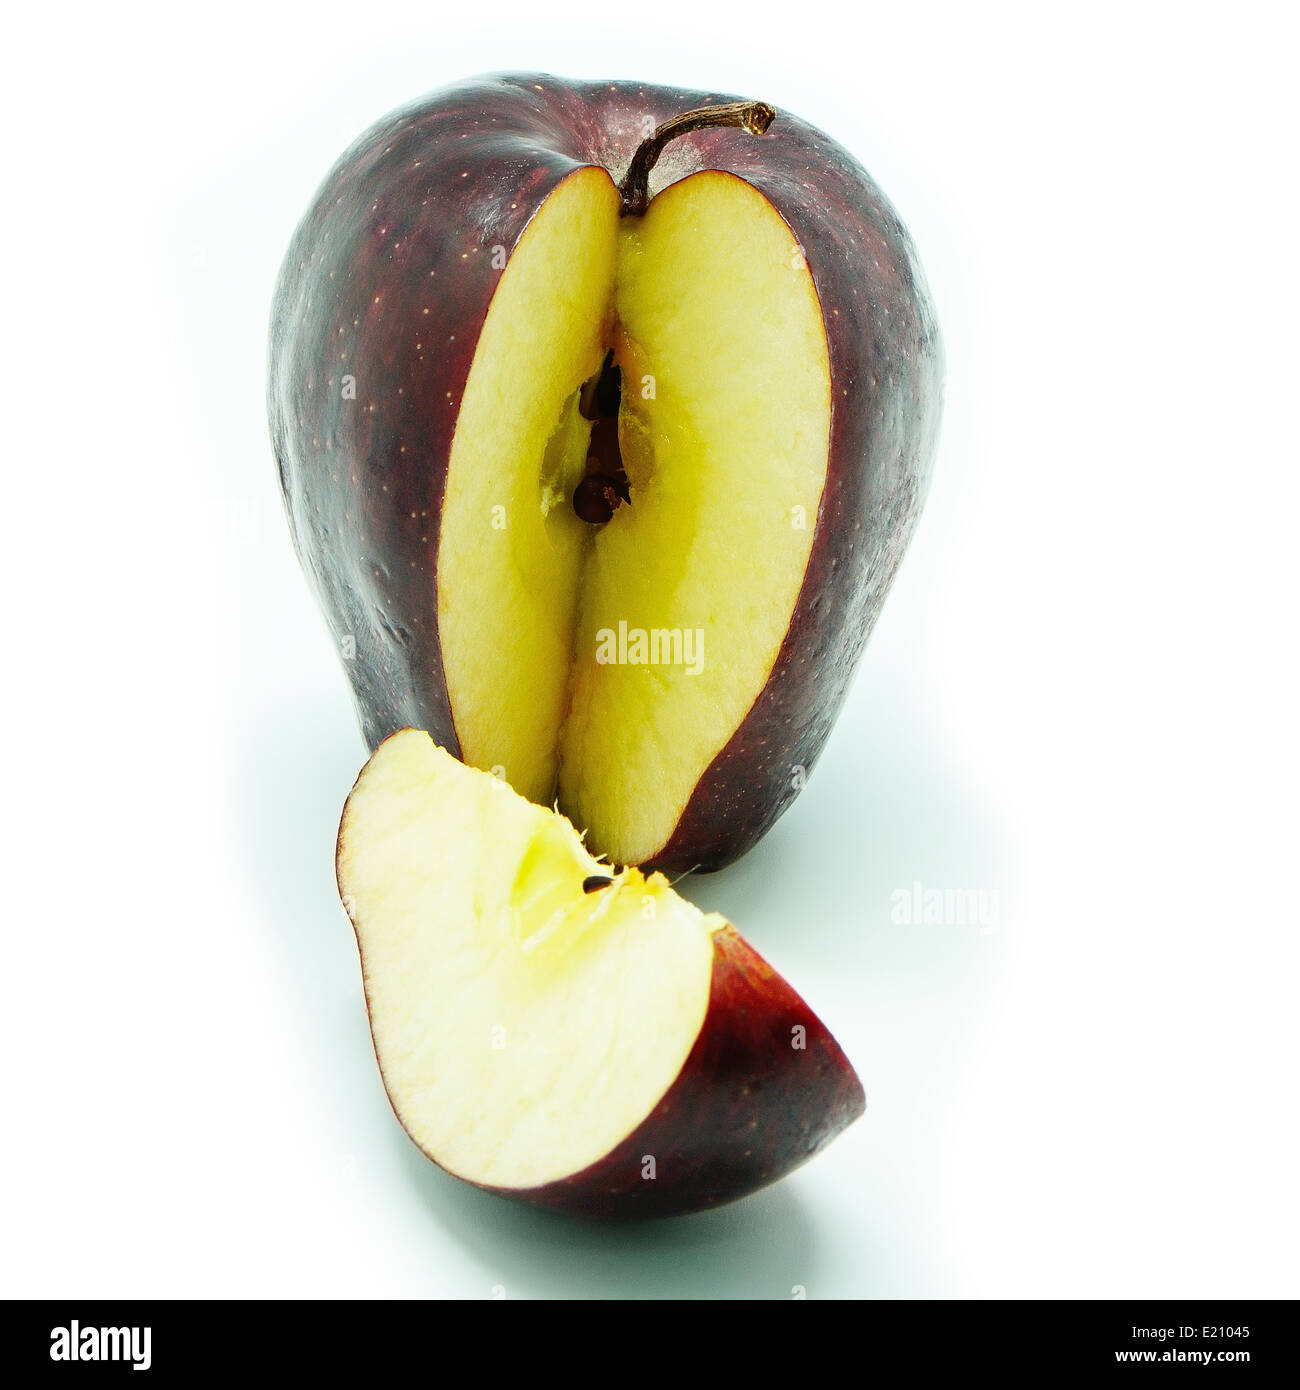 Ripe purple apple, isolated on a white background Stock Photo